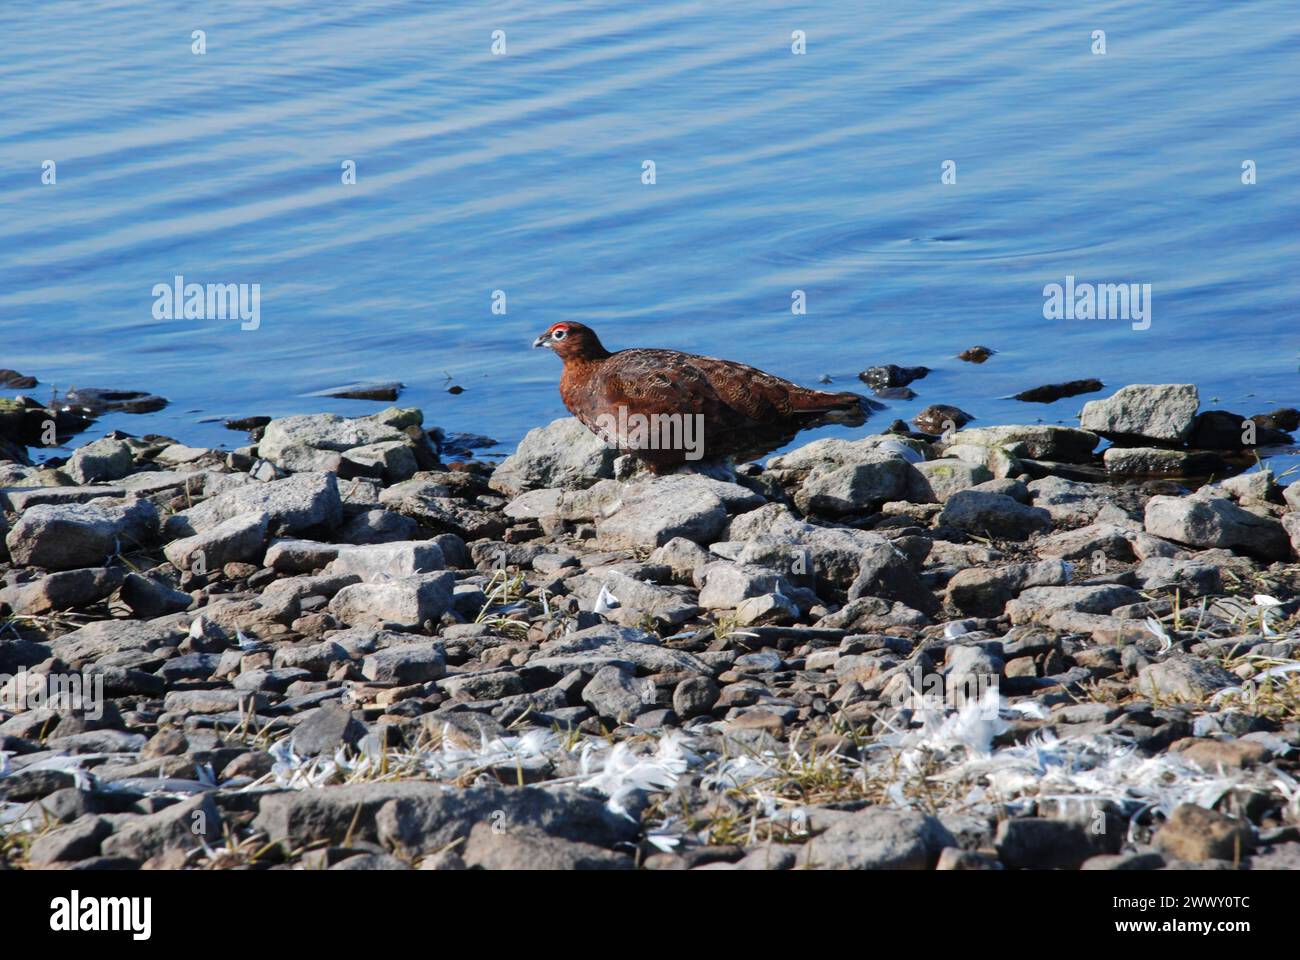 Male Red Grouse sitting among stones at waters edge and in full sun Stock Photo